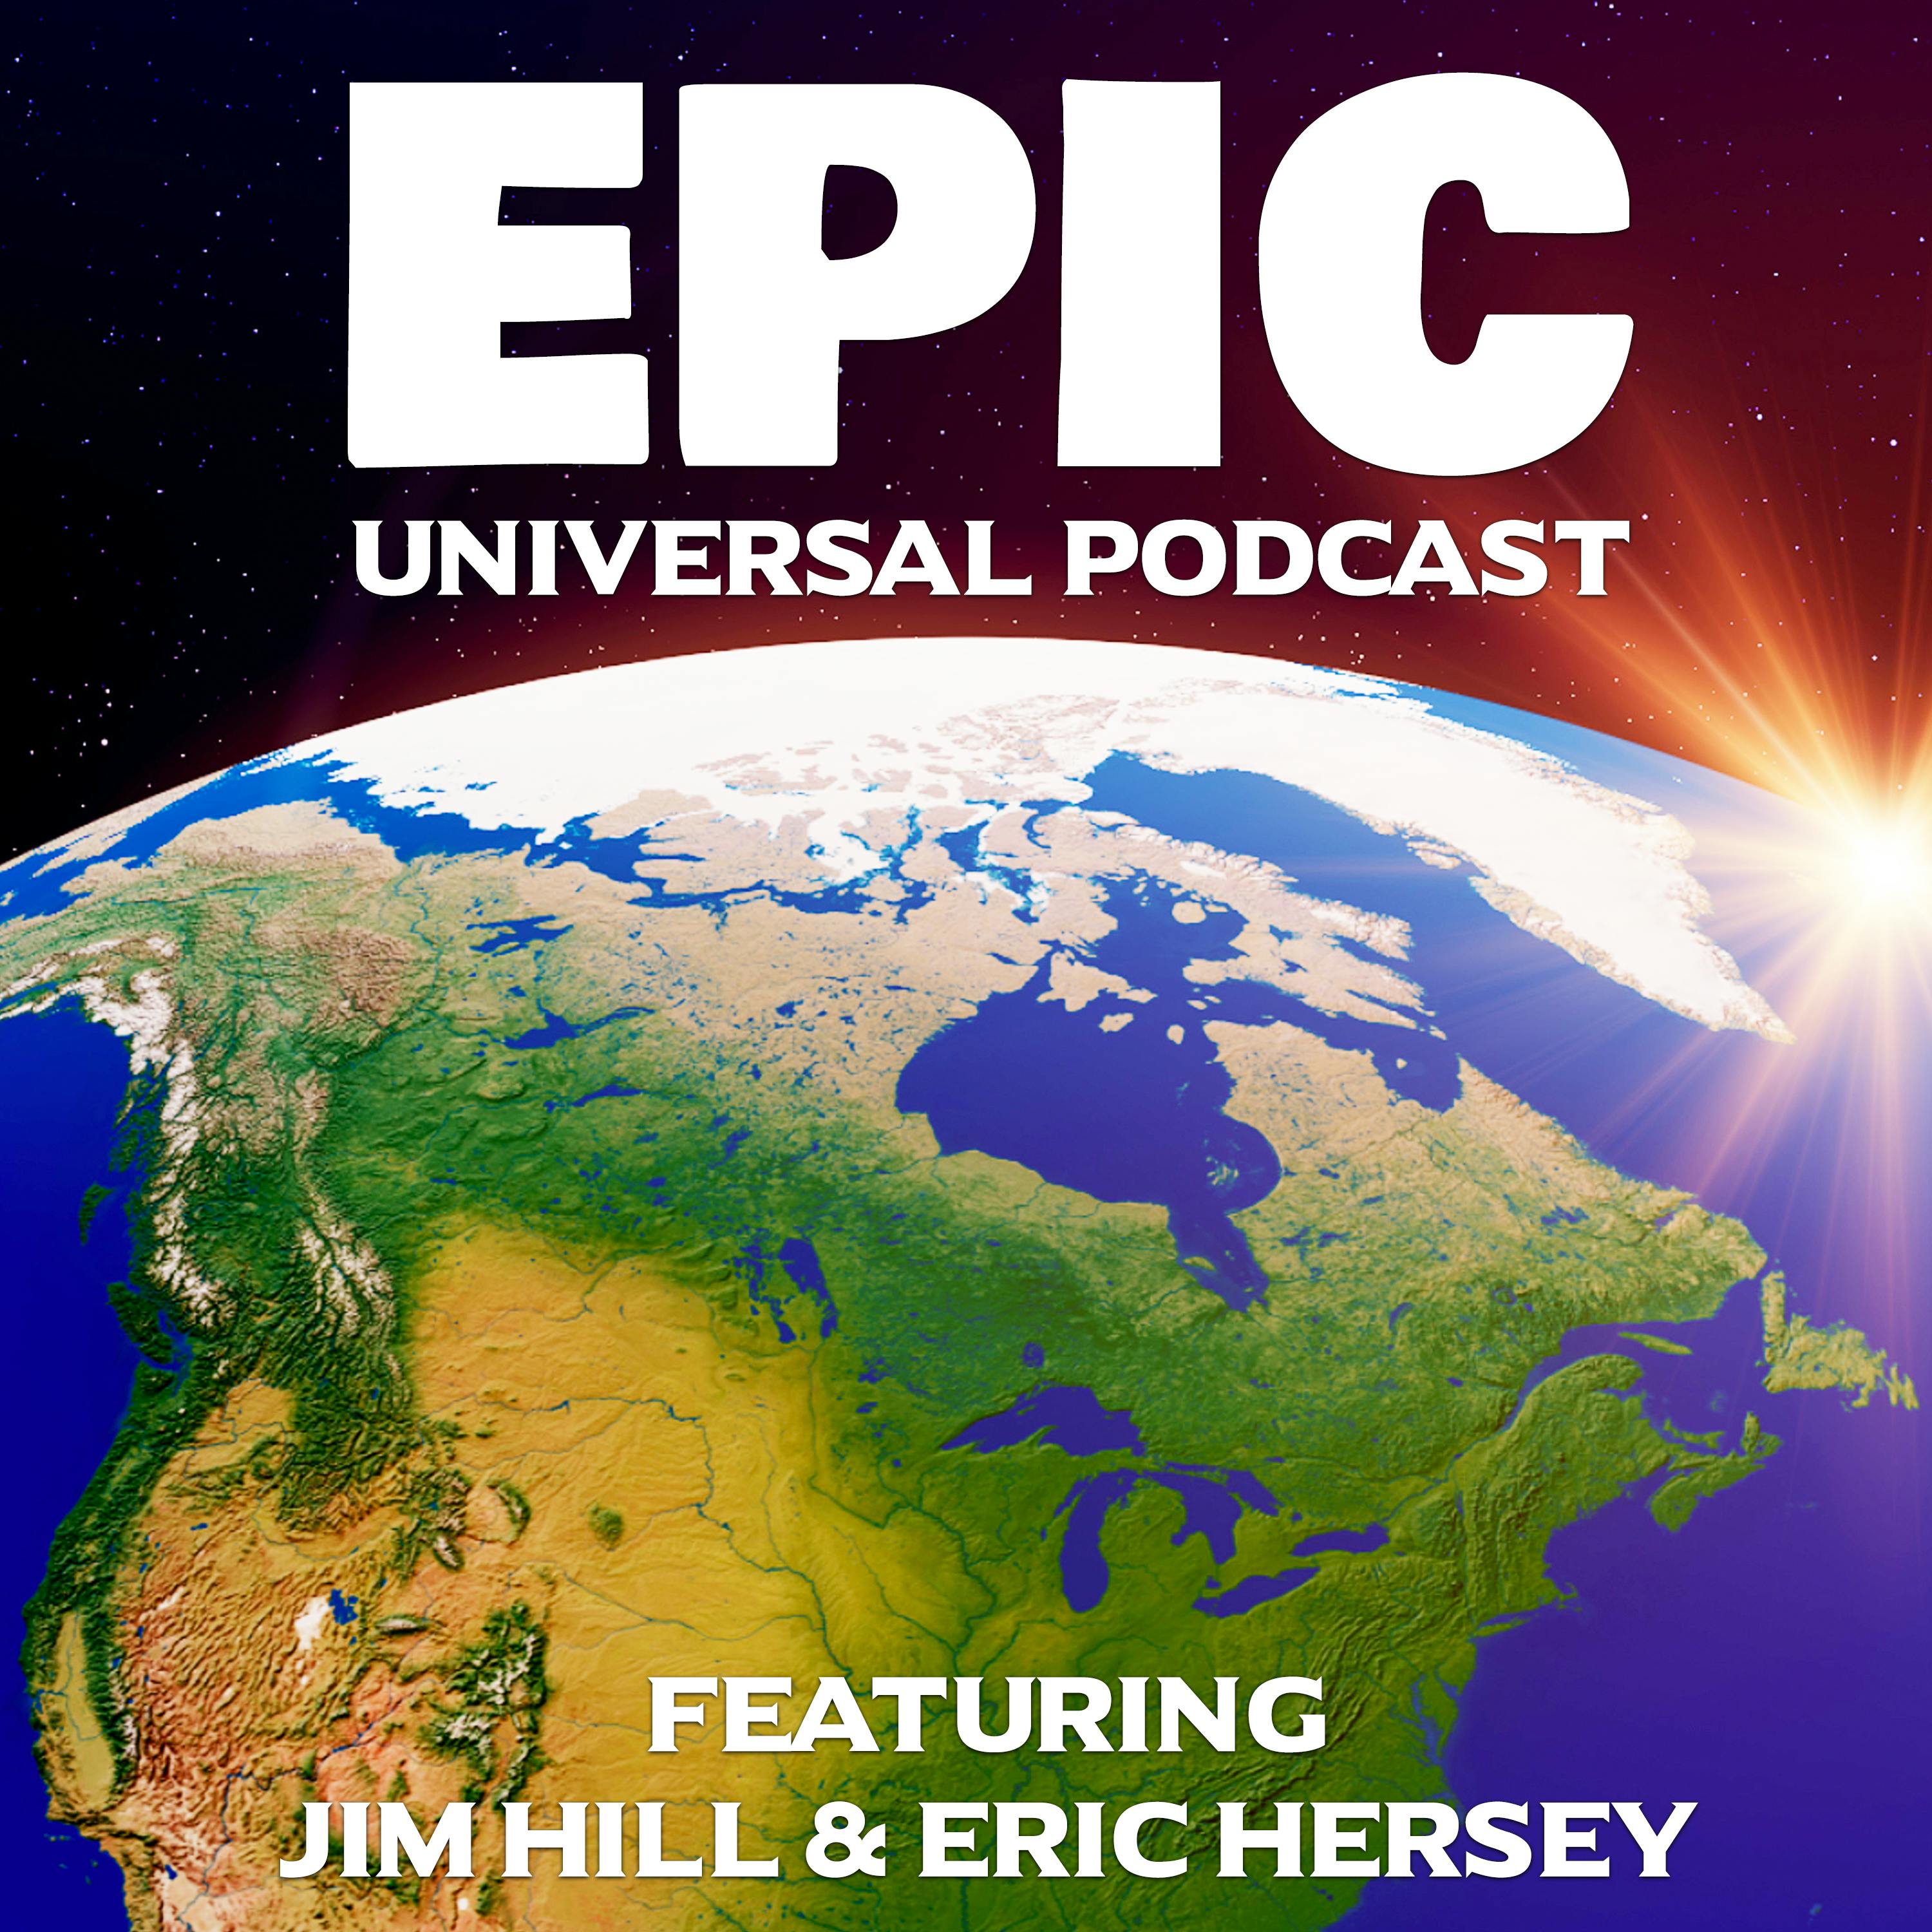 Epic Universal with Eric Hersey Ep 49-3:  Remember when the Universal Orlando Resort had a different name